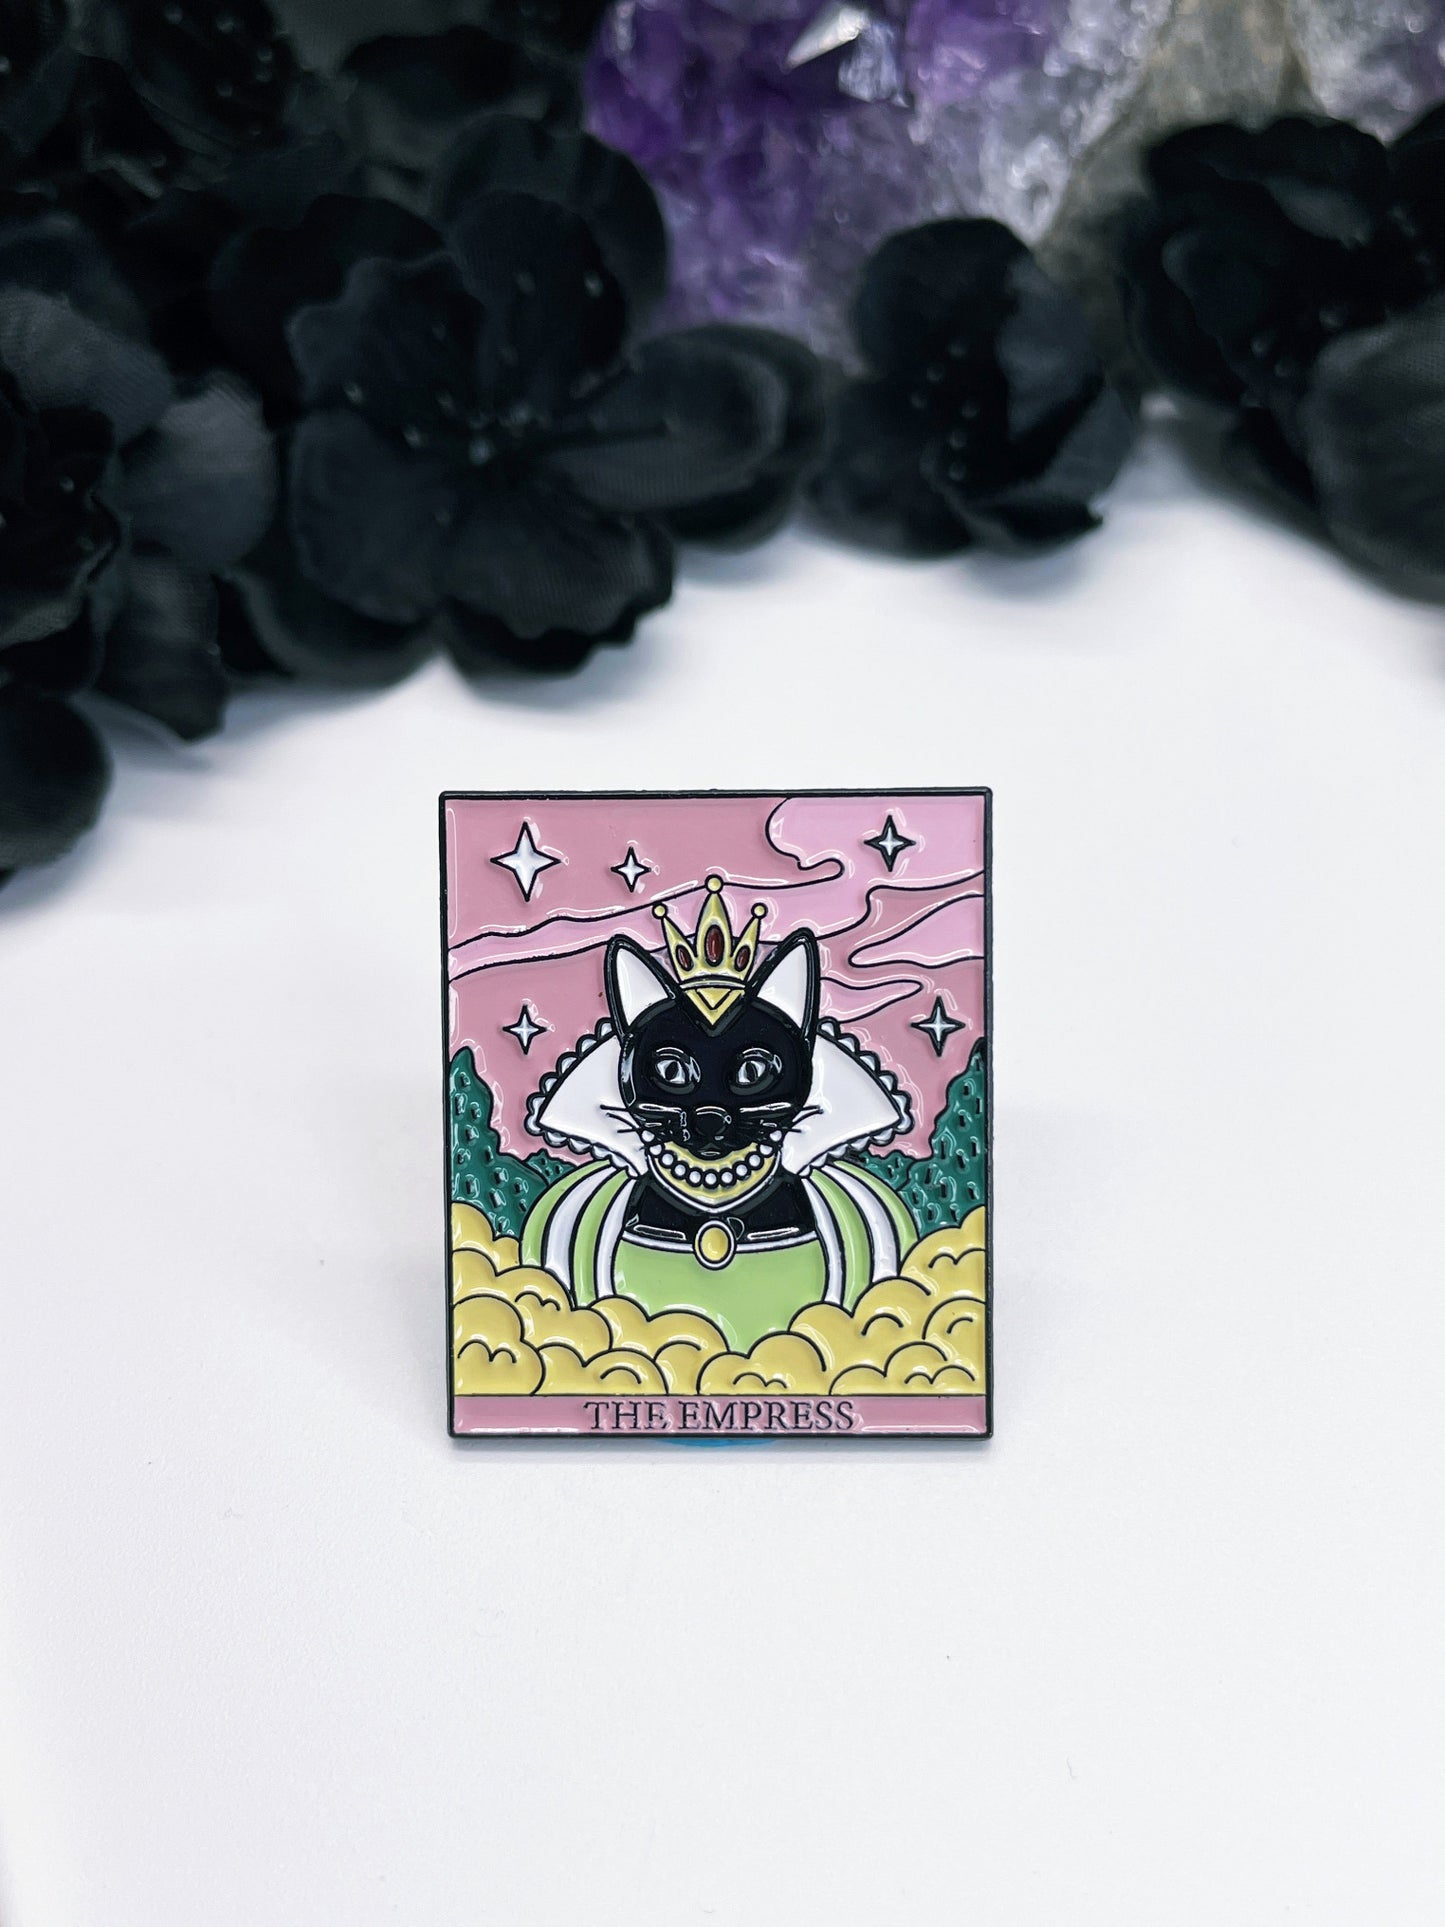  An enamel pin featuring a tarot card with a black cat on it, the card is "The Empress."